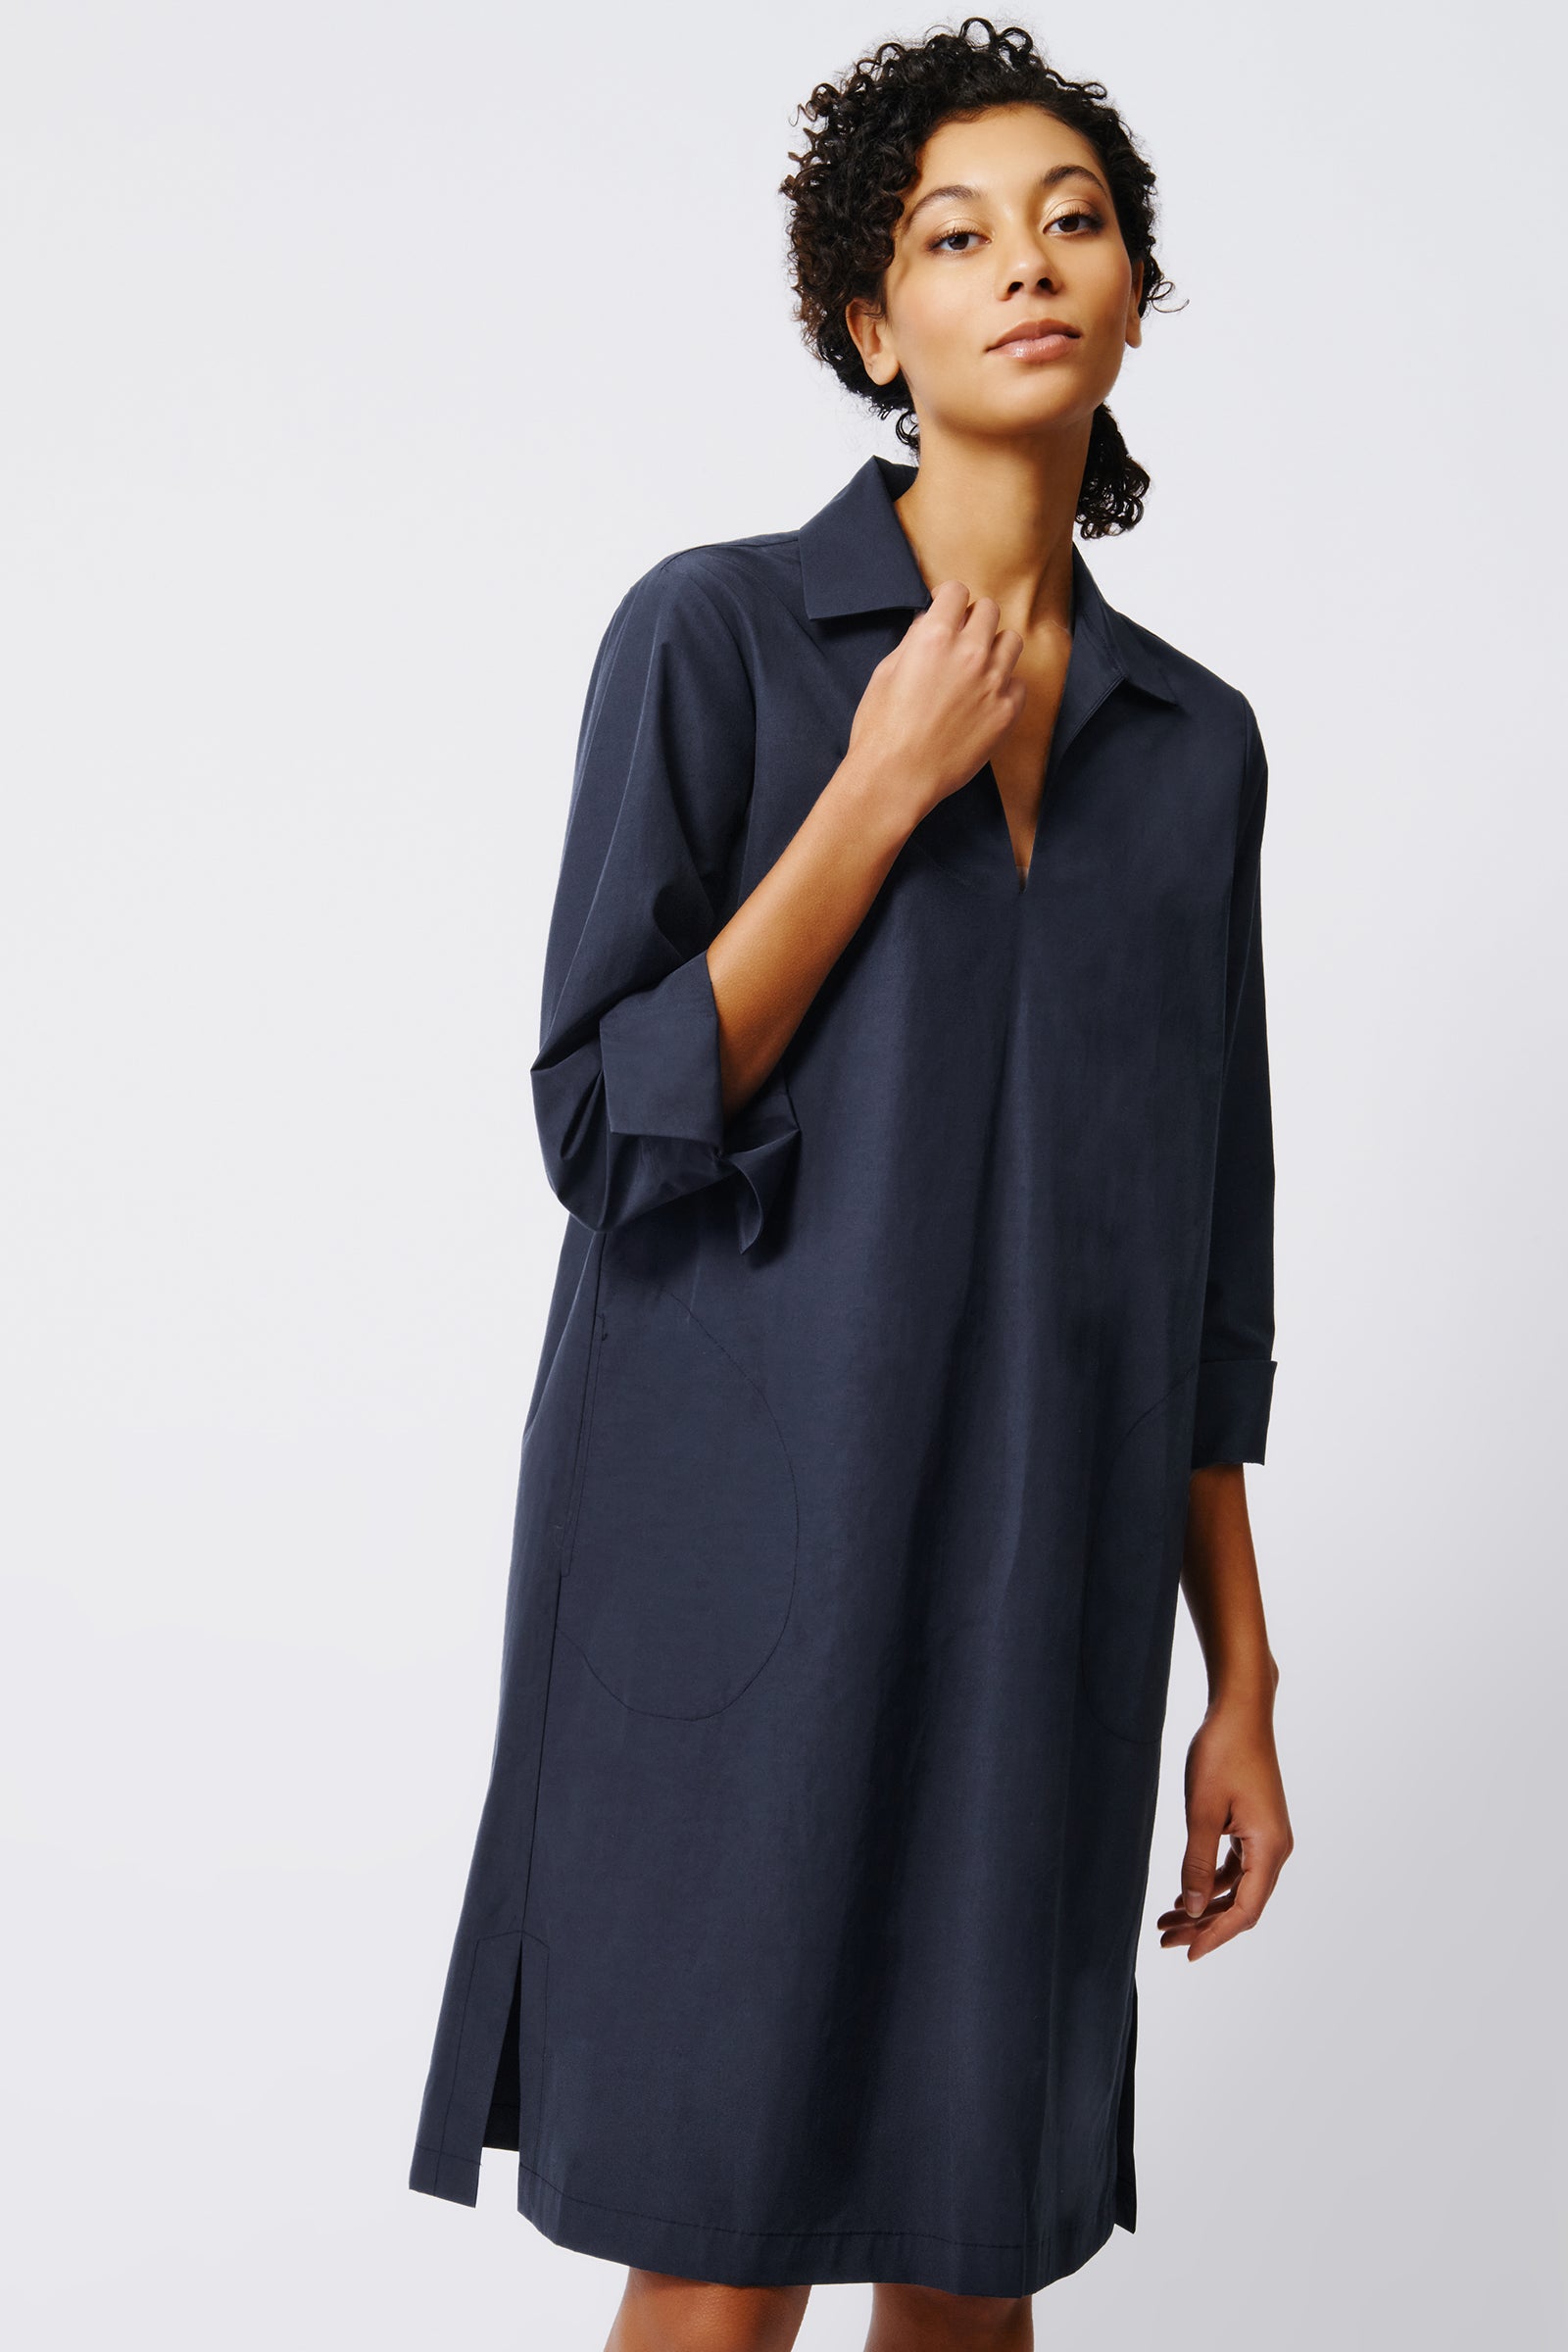 Kal Rieman Collared V Neck Dress in Navy Broadcloth on Model Front View Crop